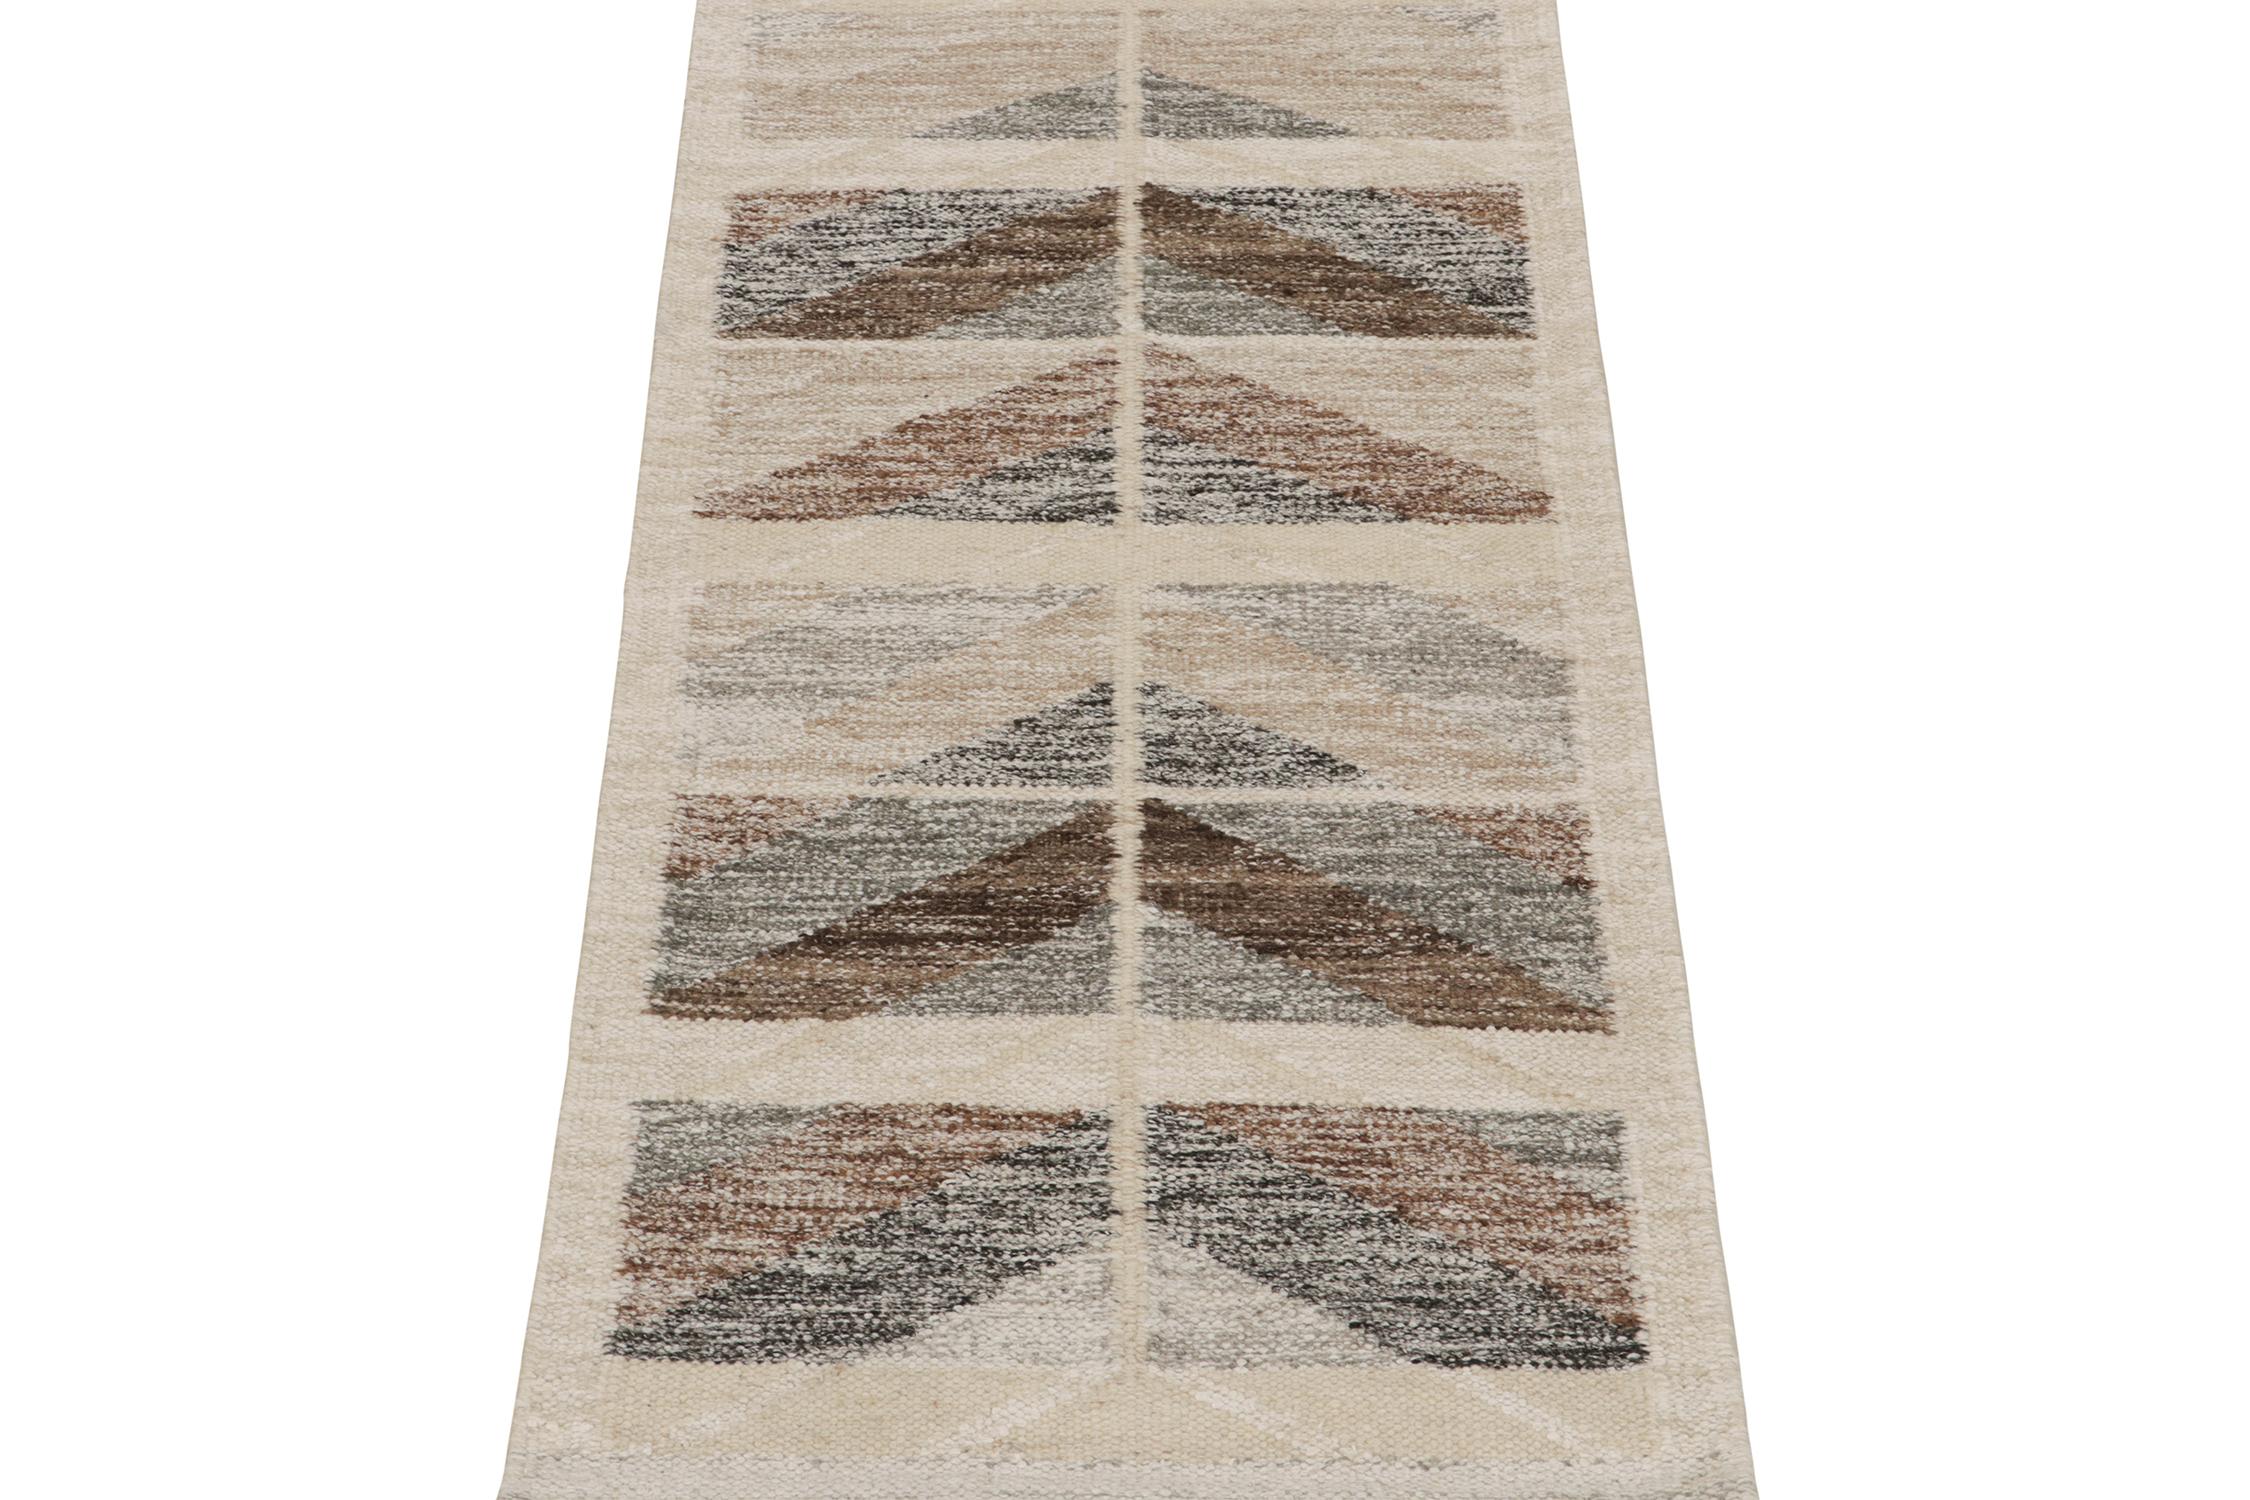 This 2×6 Swedish style kilim runner is a new addition to Rug & Kilim’s award-winning Scandinavian flat weave collection.

Further On the Design:

This runner is handwoven in wool and undyed, natural yarns that lend it a handsome, unique look of